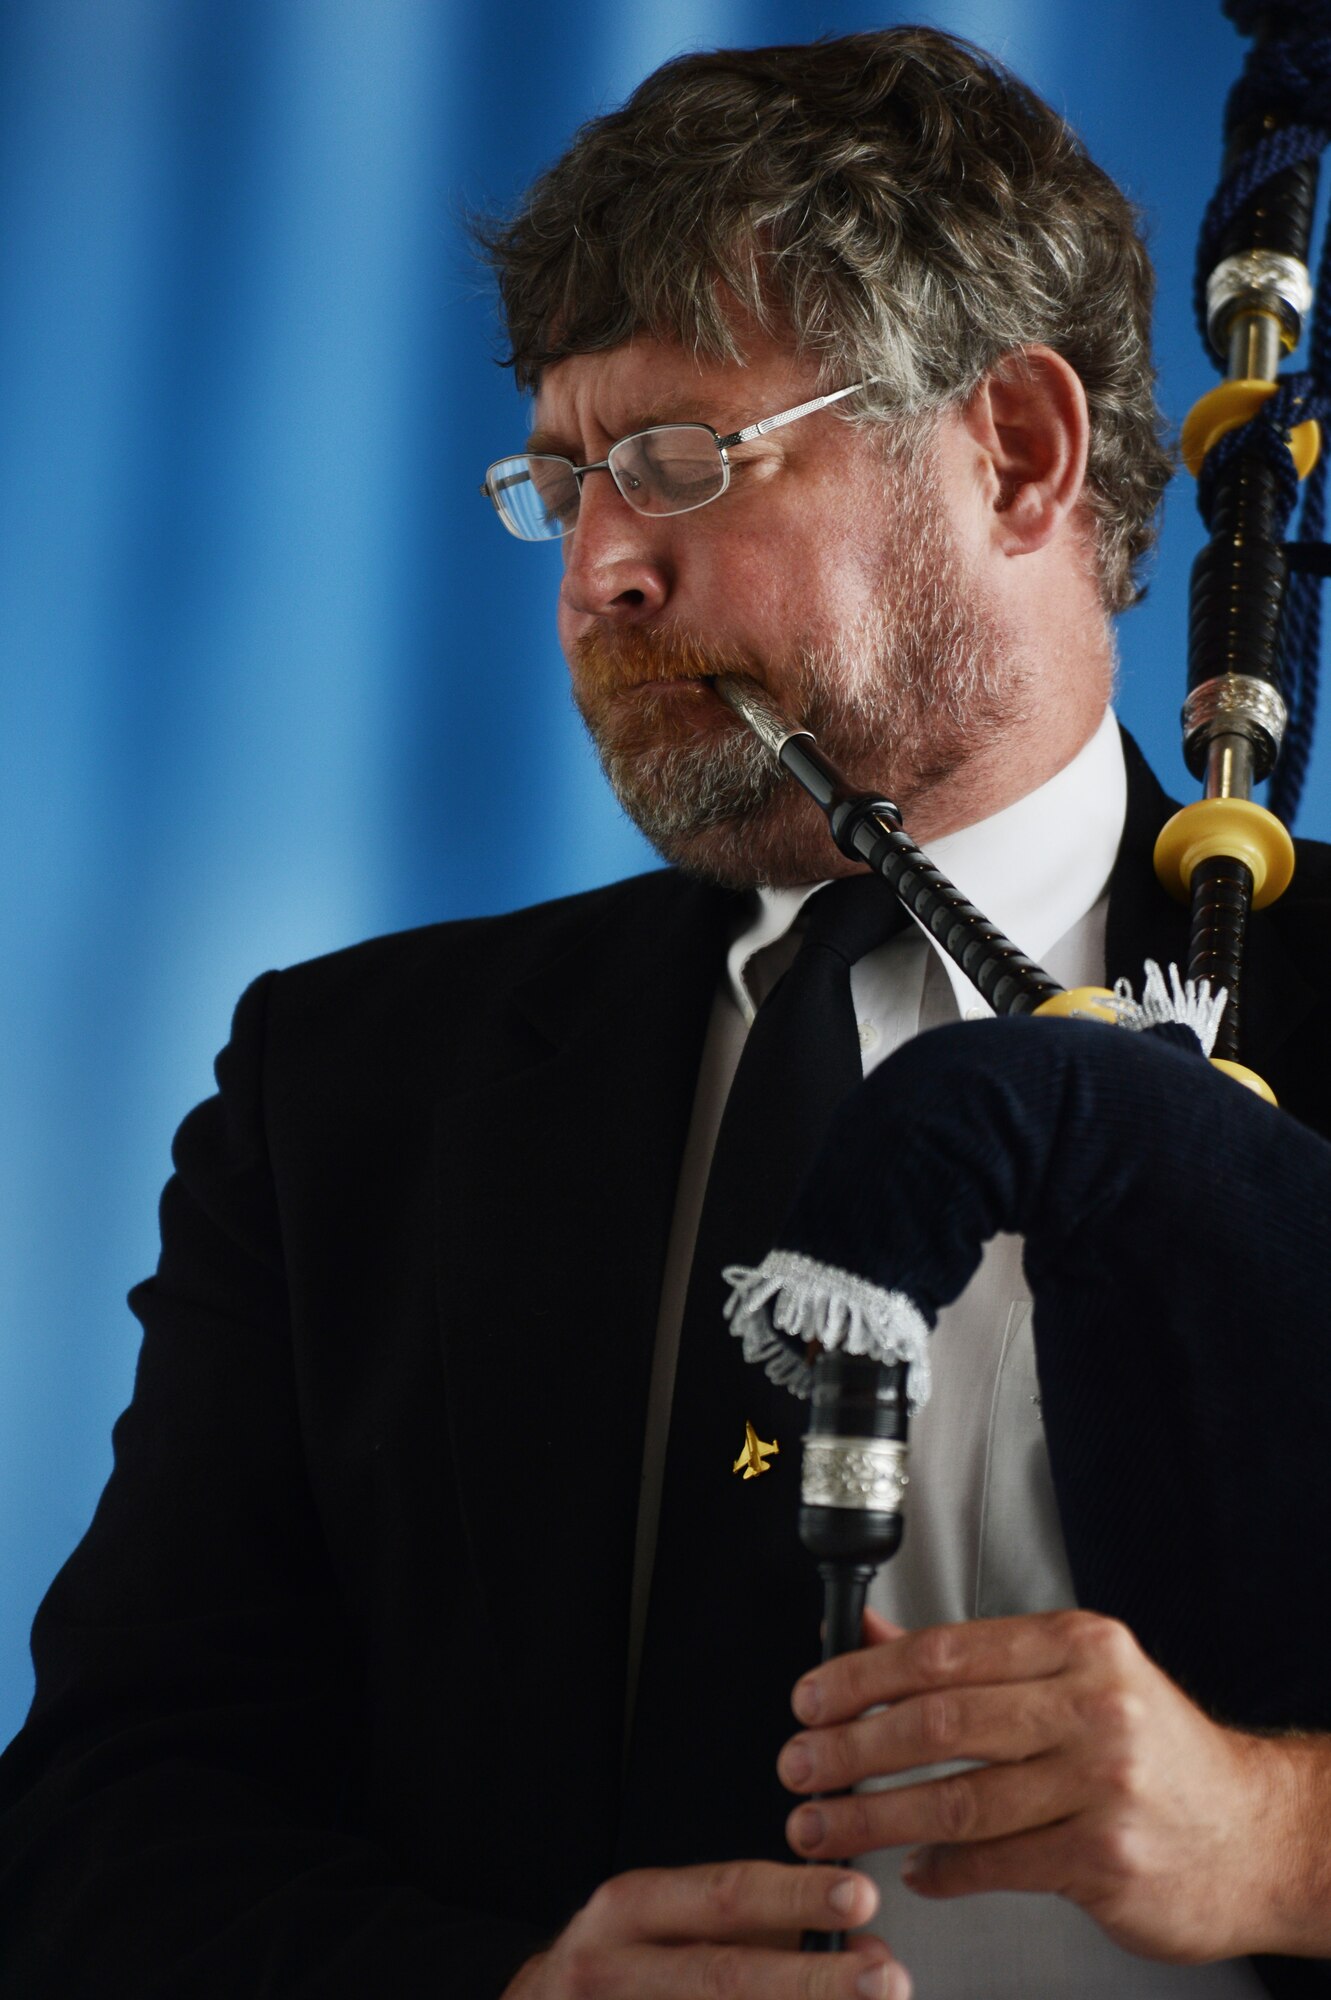 Retired U.S. Air Force Col. Robert Hopkins plays "Amazing Grace" with a bagpipe during a memorial held for Capt. James Steel, 77th Fighter Squadron pilot, in Hangar 1200 at Shaw Air Force Base, S.C., April 30, 2013. More than 450 people attended the memorial. Steel passed away when his F-16 Fighting Falcon crashed in Afghanistan April 3, 2013. (U.S. Air Force photo by Senior Airman Tabatha Zarrella/Released)
